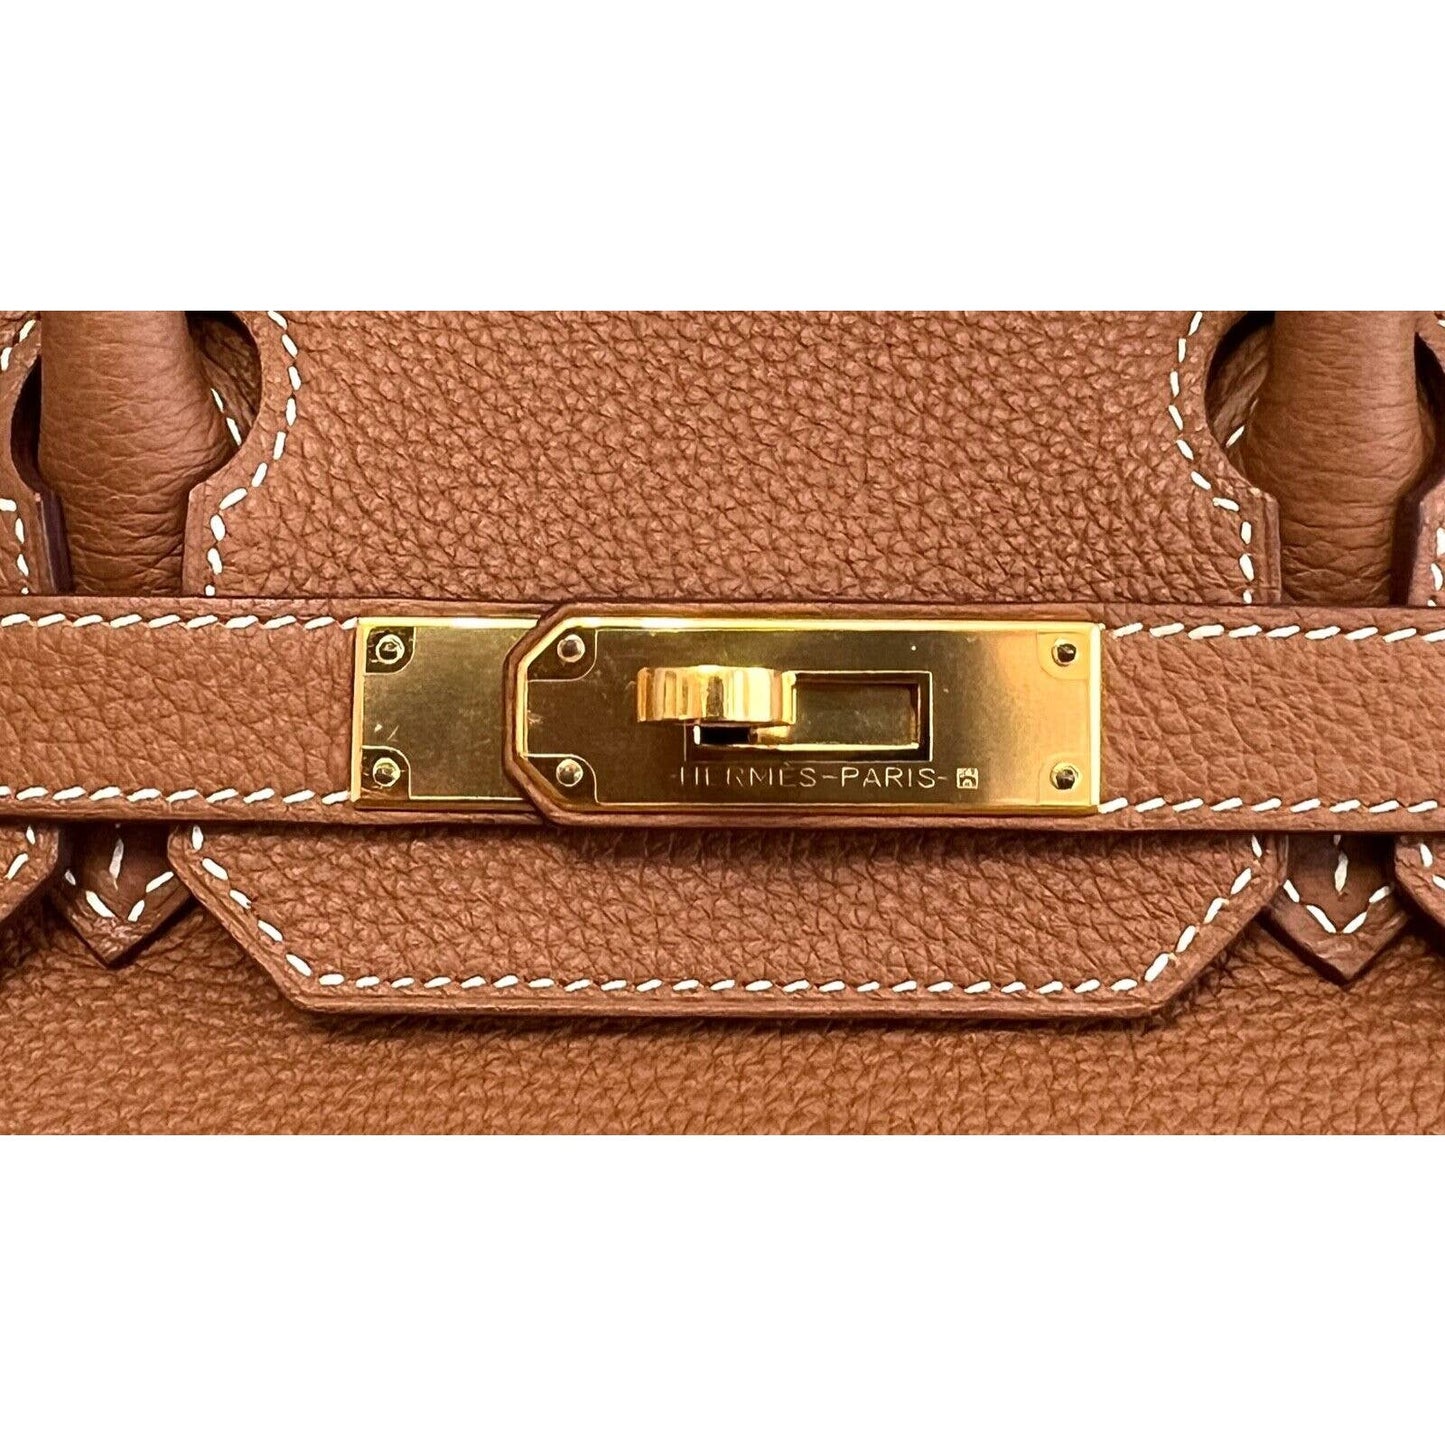 tan #hermes bag with #gold buckle yes pleaseee